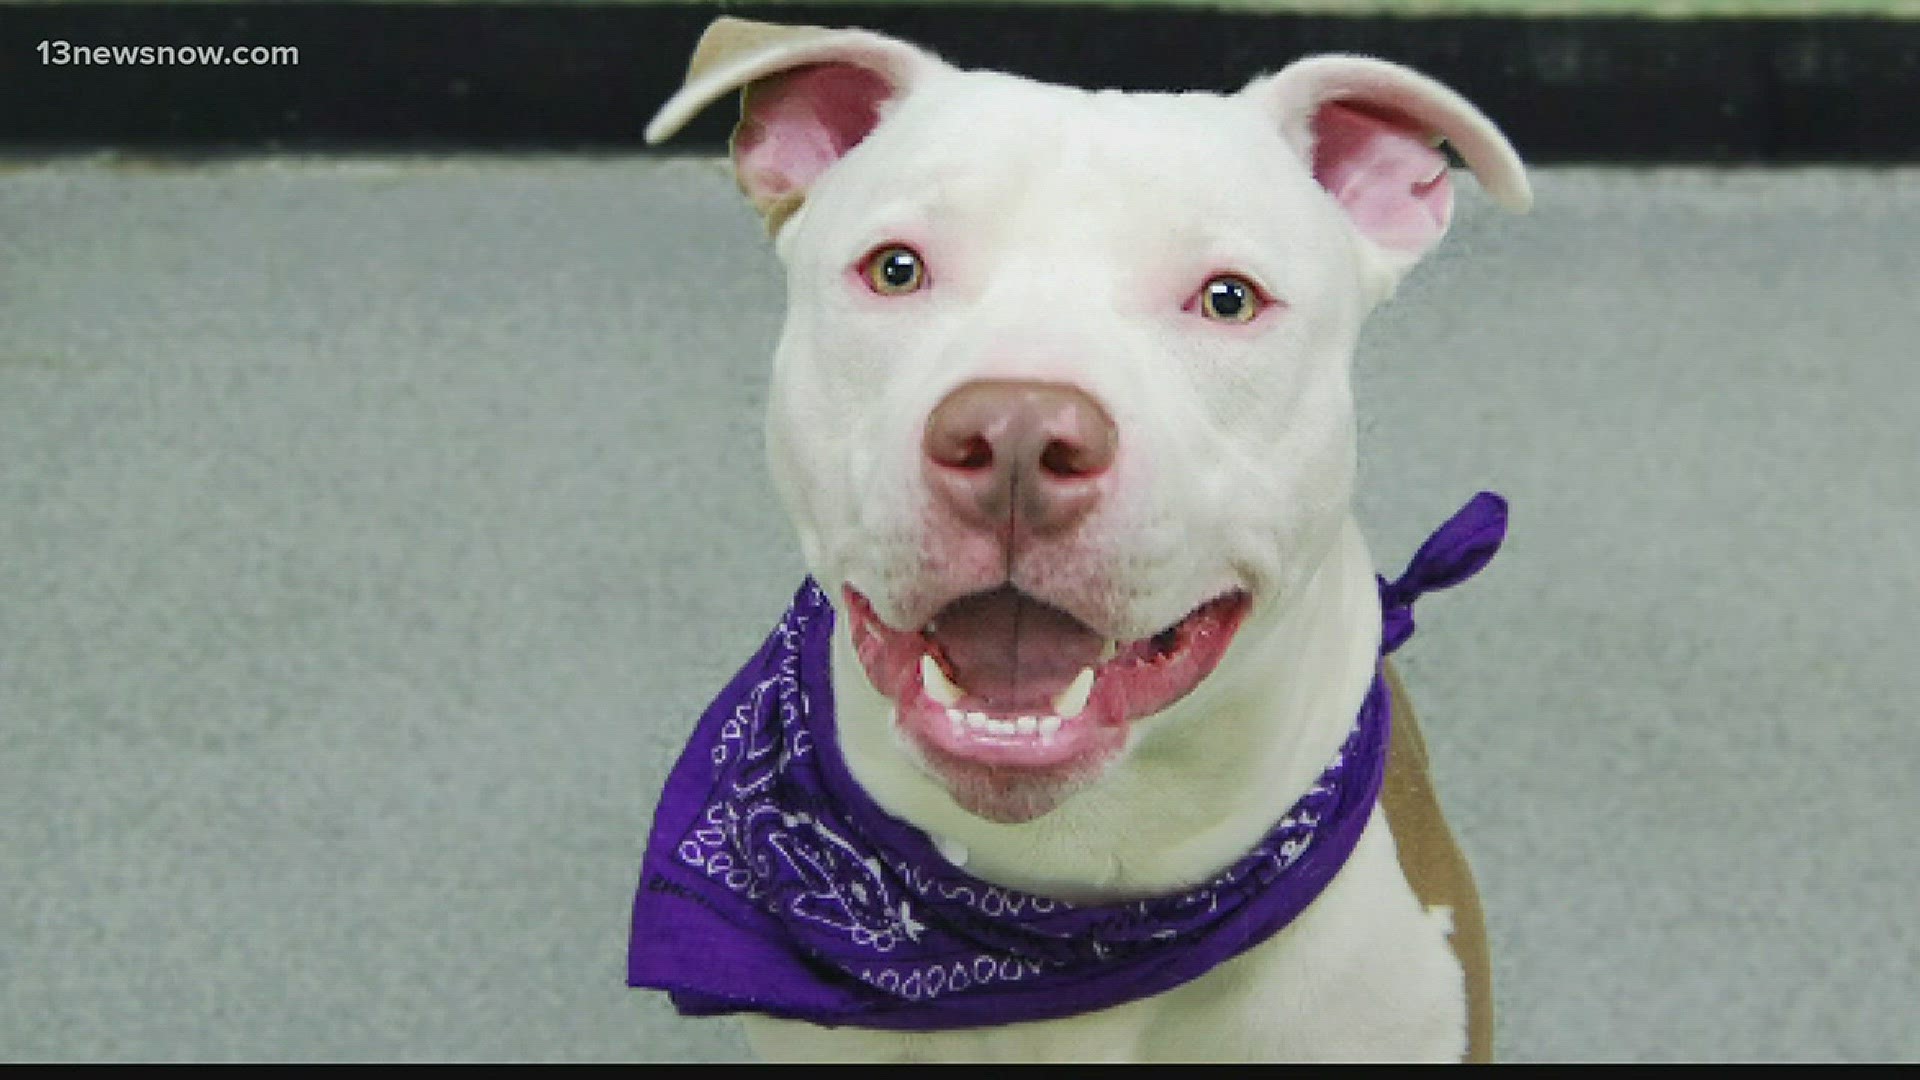 A bill is working its way through the General Assembly that aims to regulate animal training centers after a pit bull mauled a 90-year-old woman to death.